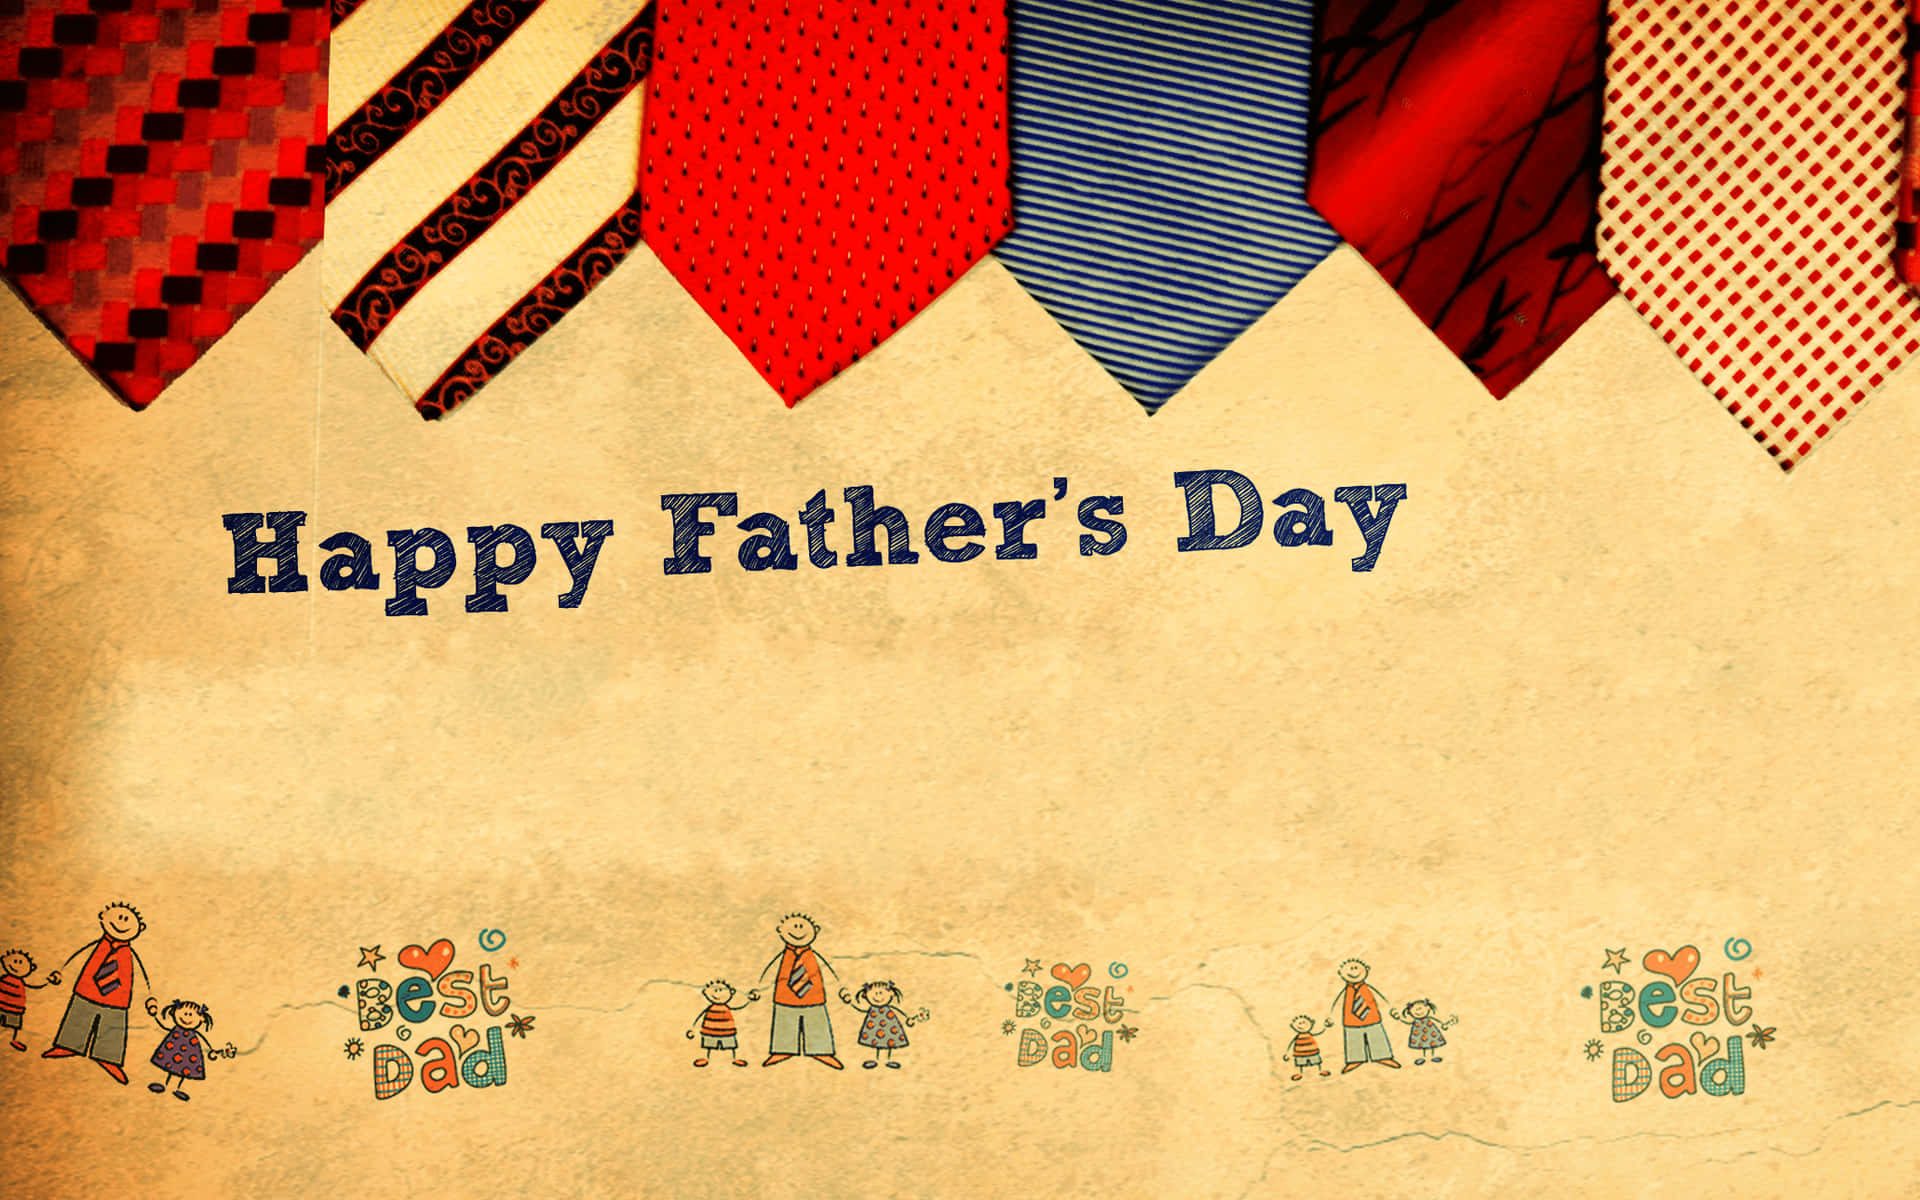 A heartwarming Father's Day background illustration